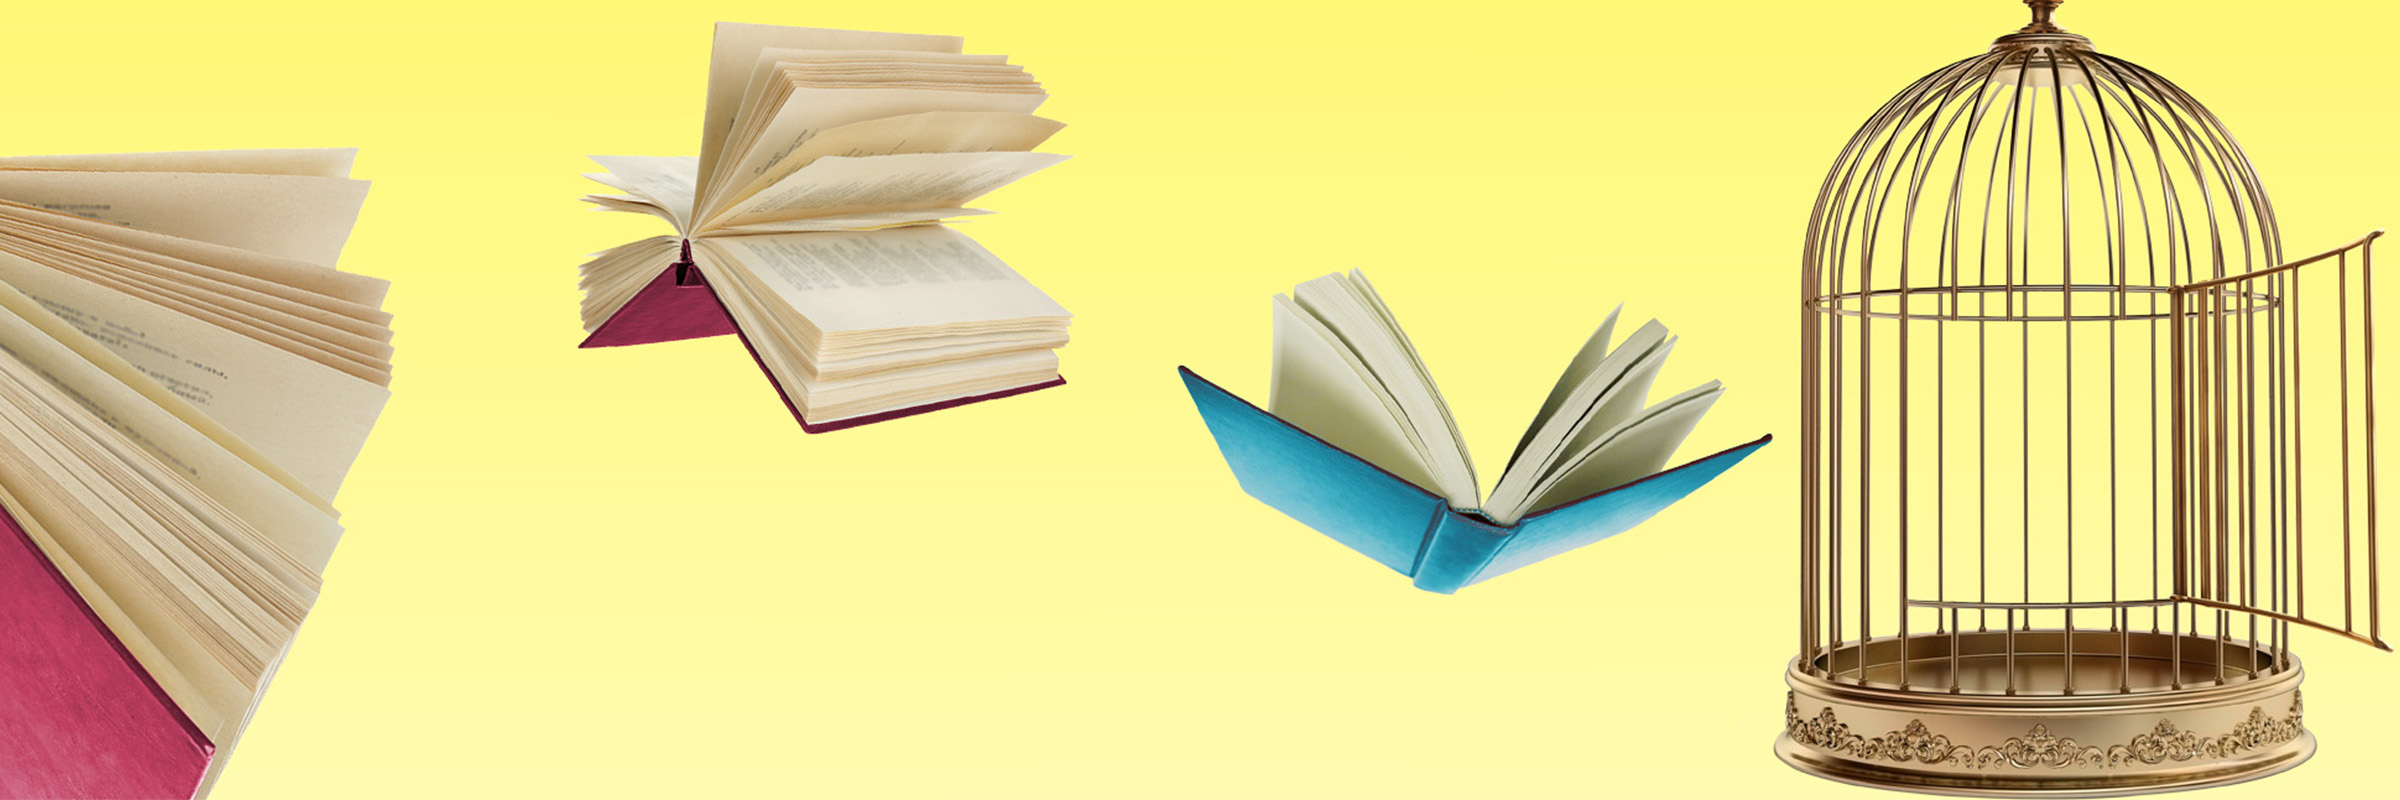 A yellow background with flying books and an open birdcage. Image created by Jeff Bland.